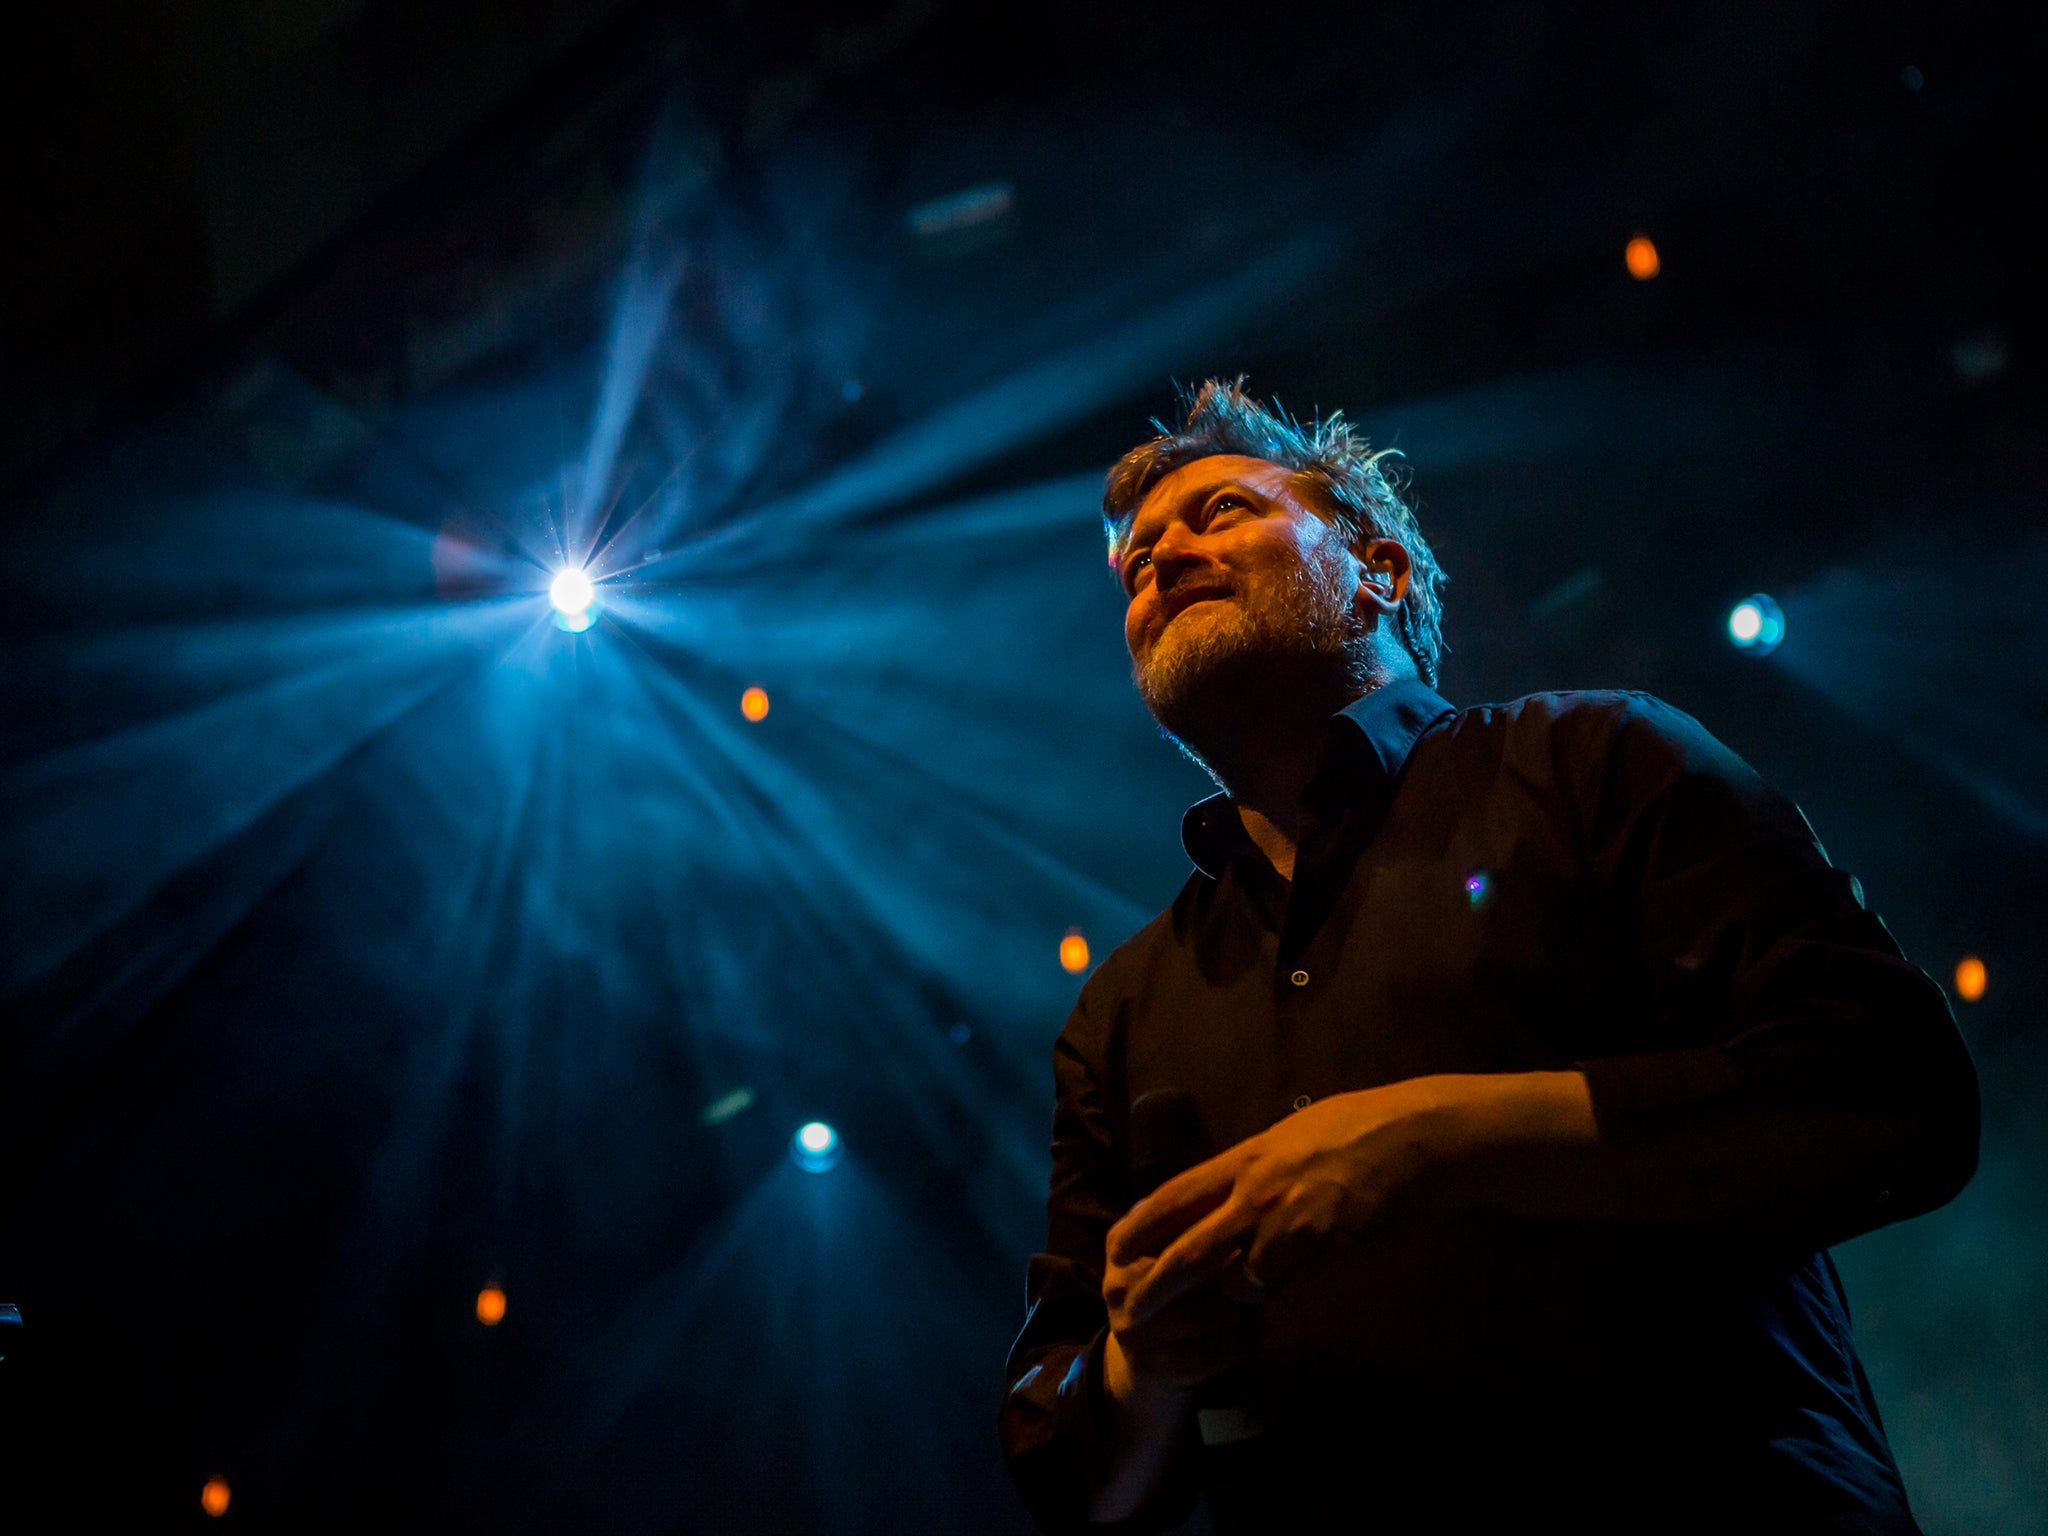 Elbow's frontman performs at Meltdown festival at the Southbank Centre in London last Friday